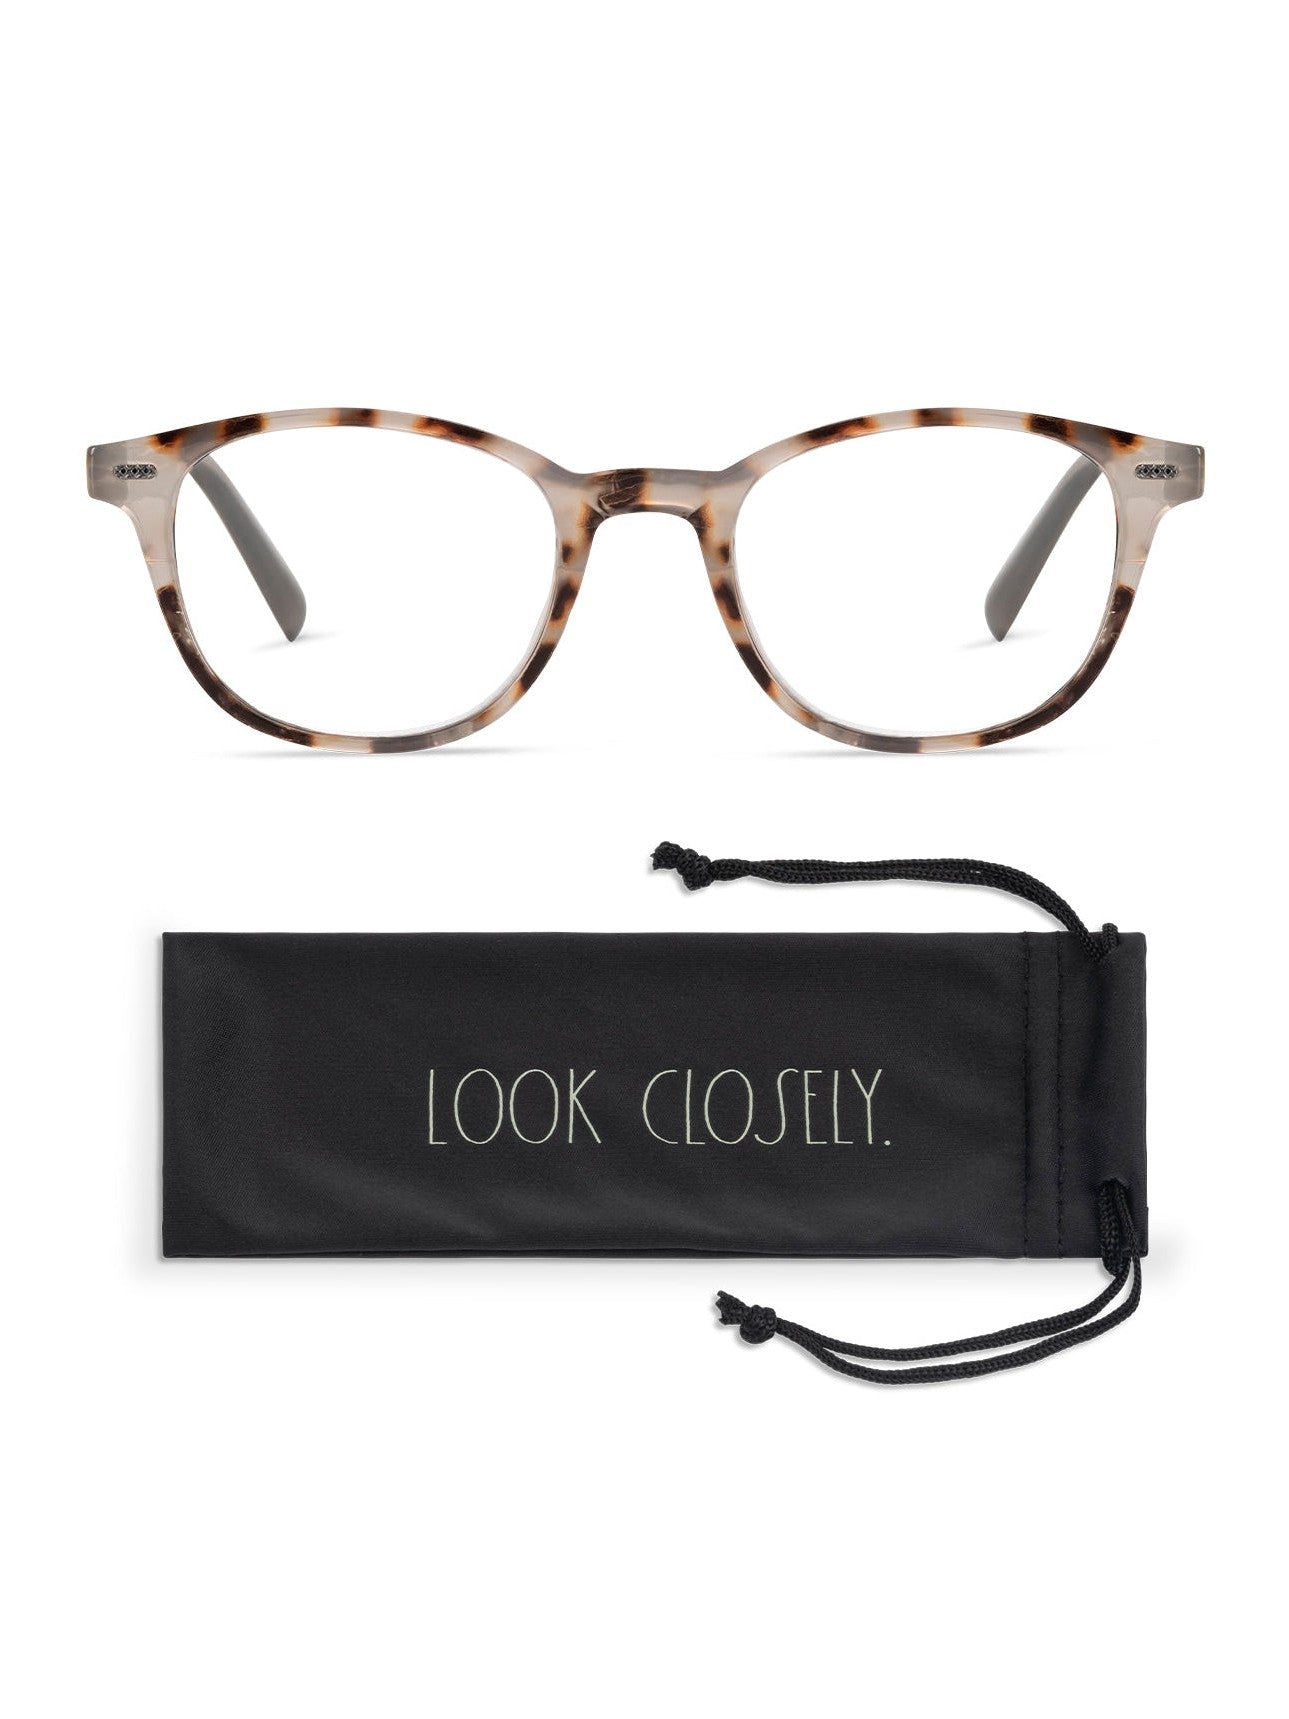 ELIZA Blue Light Blocking Reading Glasses with "LOOK CLOSELY" Signature - Rae Dunn Wear